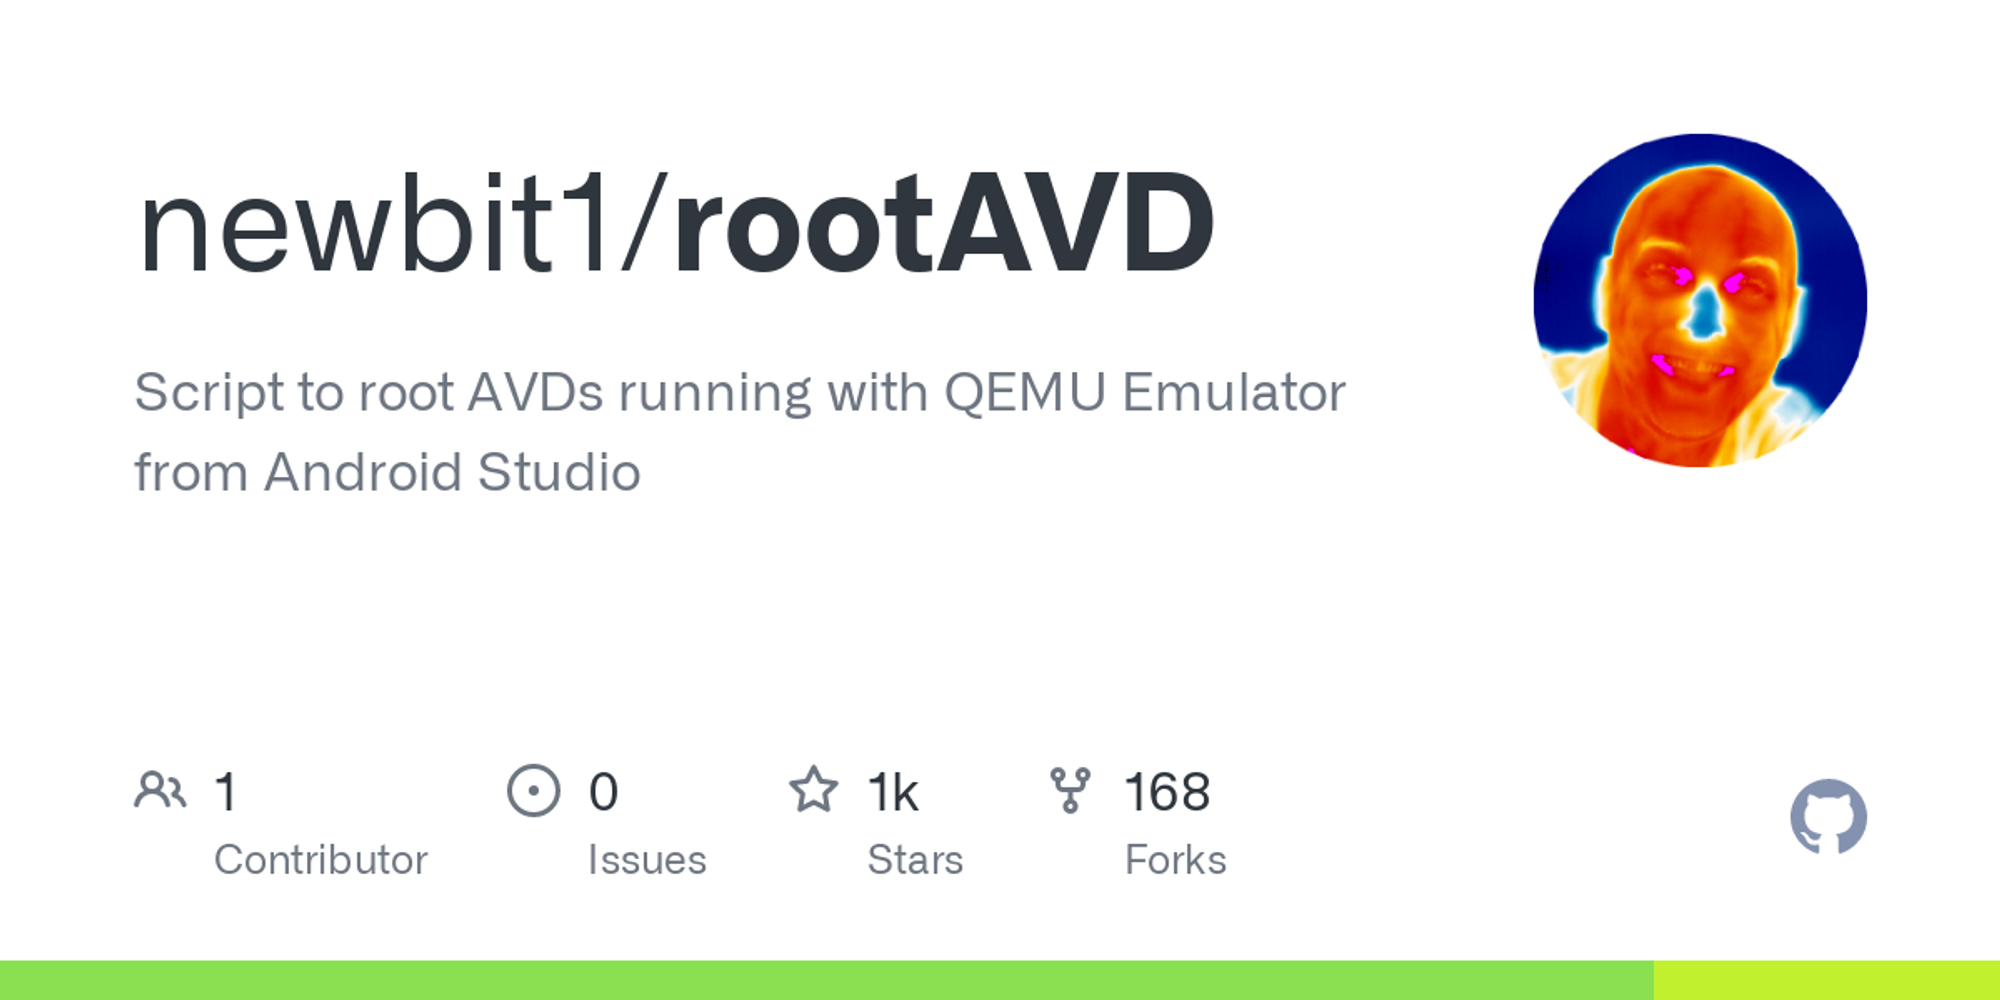 GitHub - newbit1/rootAVD: Script to root AVDs running with QEMU Emulator from Android Studio